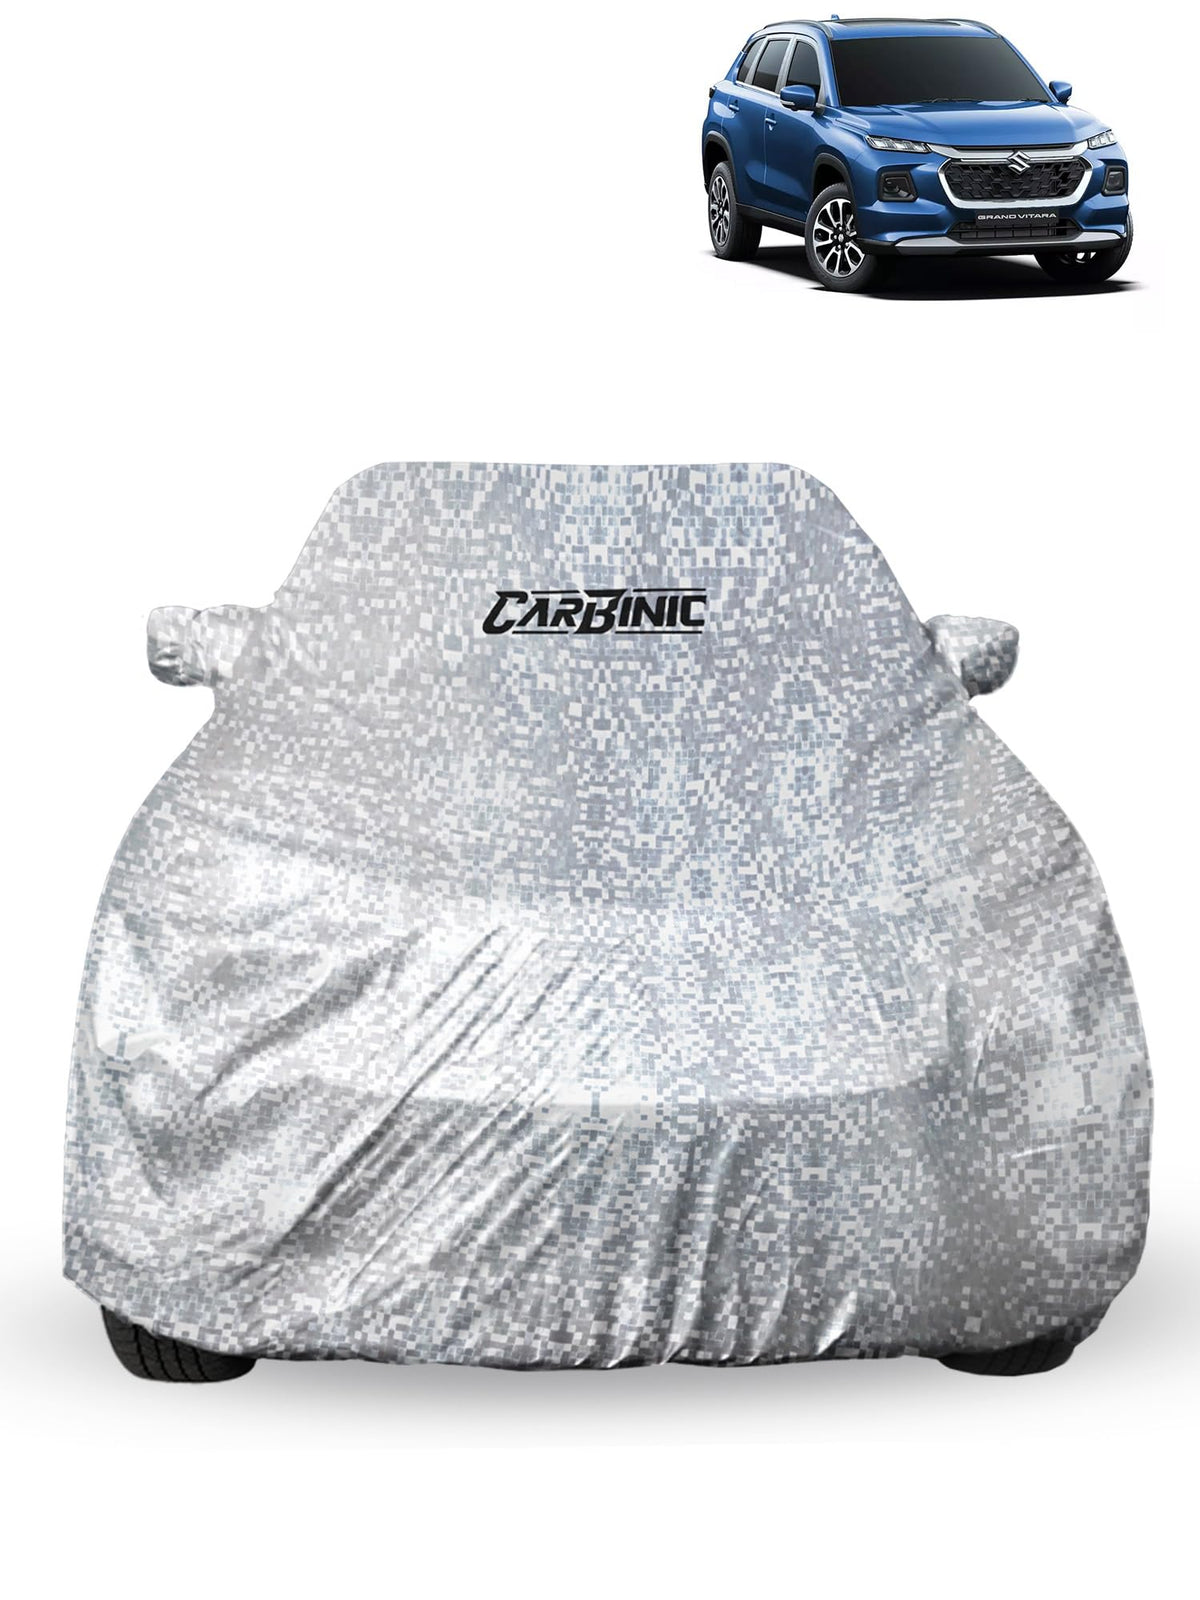 CARBINIC Car Cover for Maruti Suzuki Grand Vitara2022 Waterproof (Tested) and Dustproof Custom Fit UV Heat Resistant Outdoor Protection with Triple Stitched Fully Elastic Surface | Silver with Pockets